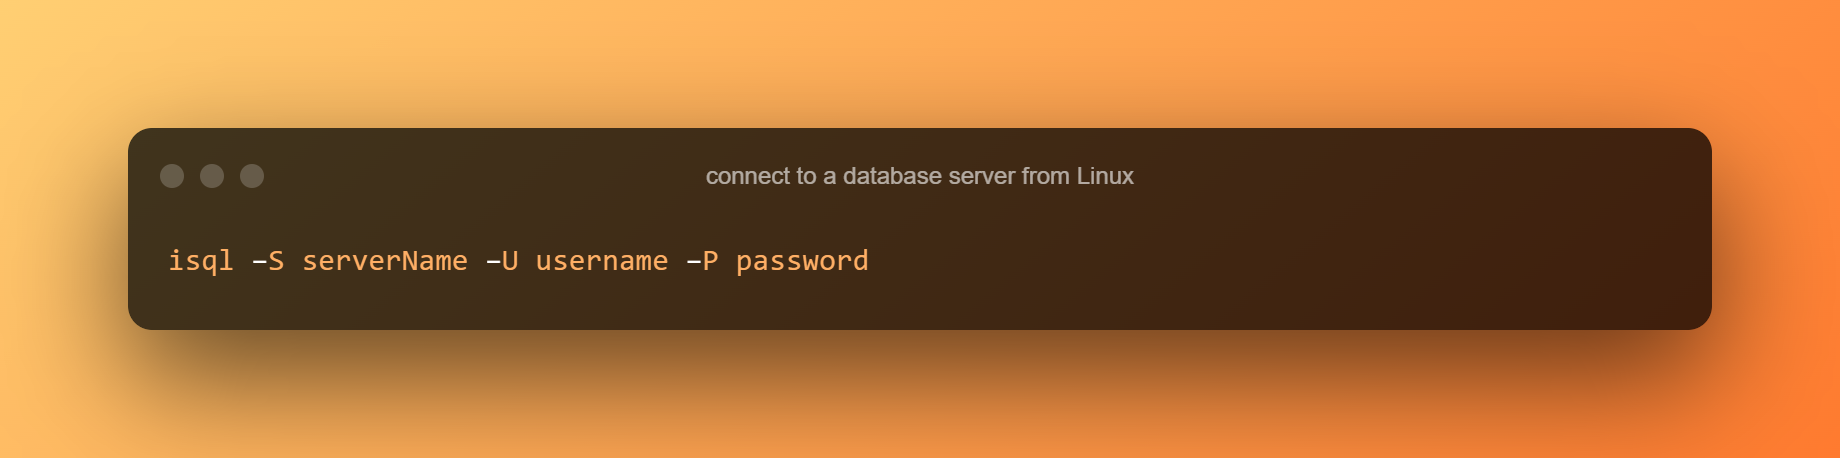 Connect To A Database Server From Linux